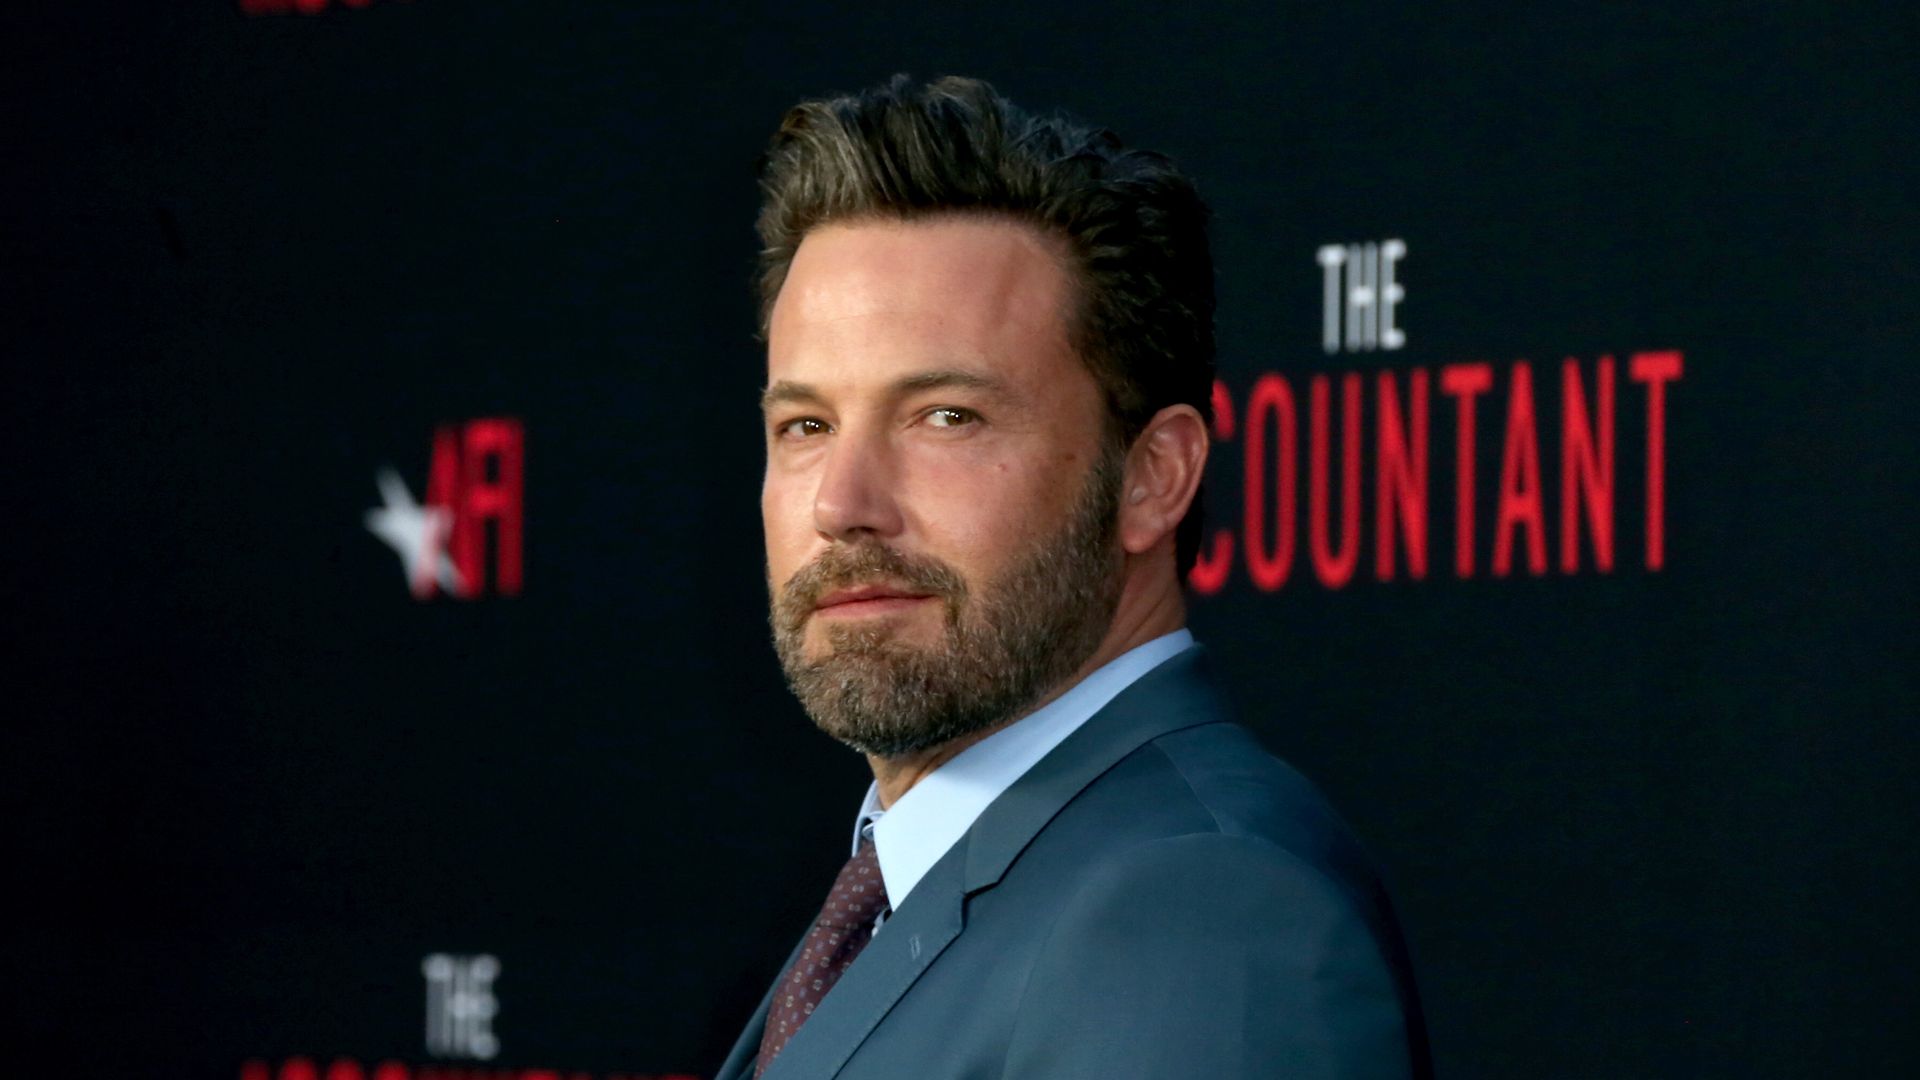 Ben Affleck attends the premiere of Warner Bros Pictures' "The Accountant" at TCL Chinese Theatre on October 10, 2016 in Hollywood, California